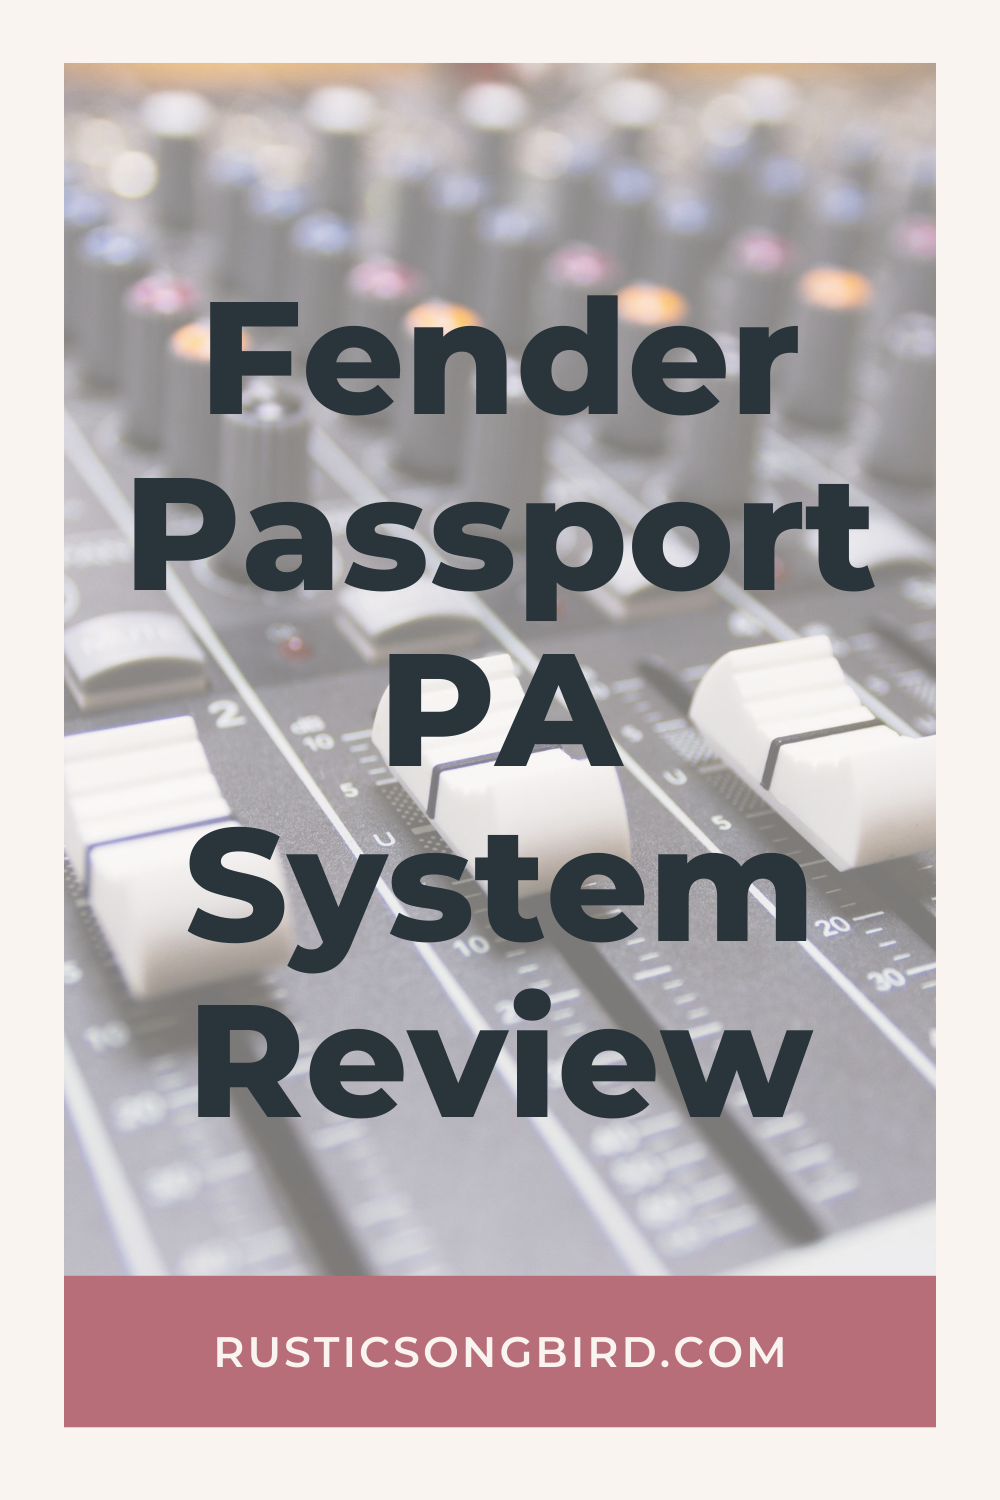 sound system board in the background, and title text for the blog post "Fender Passport PA System Review"